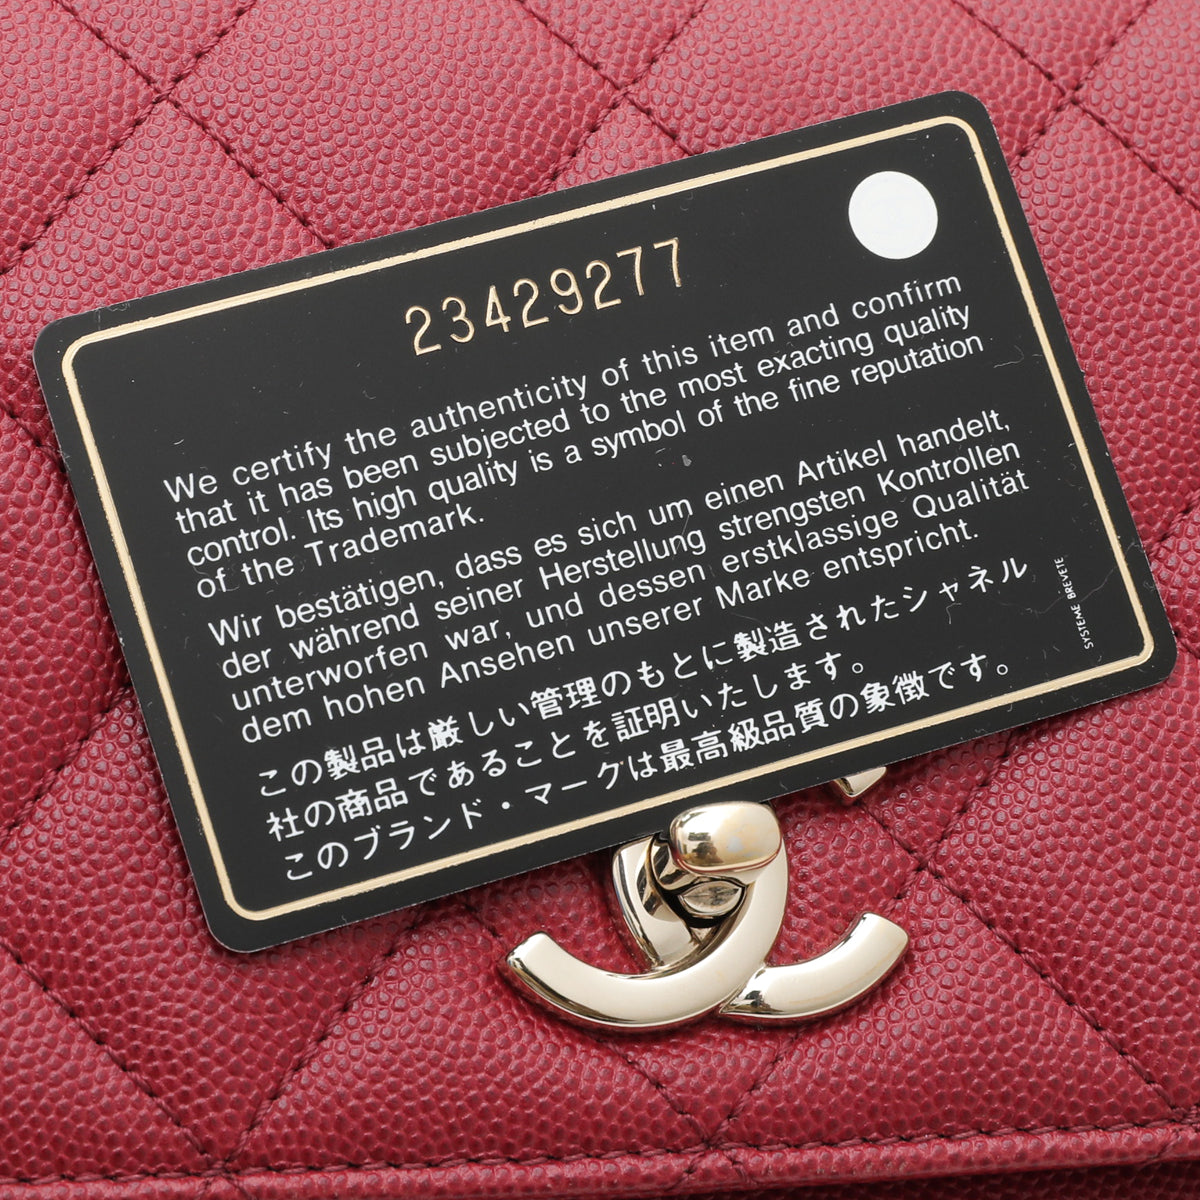 Chanel Red CC Business Affinity Small Bag – The Closet